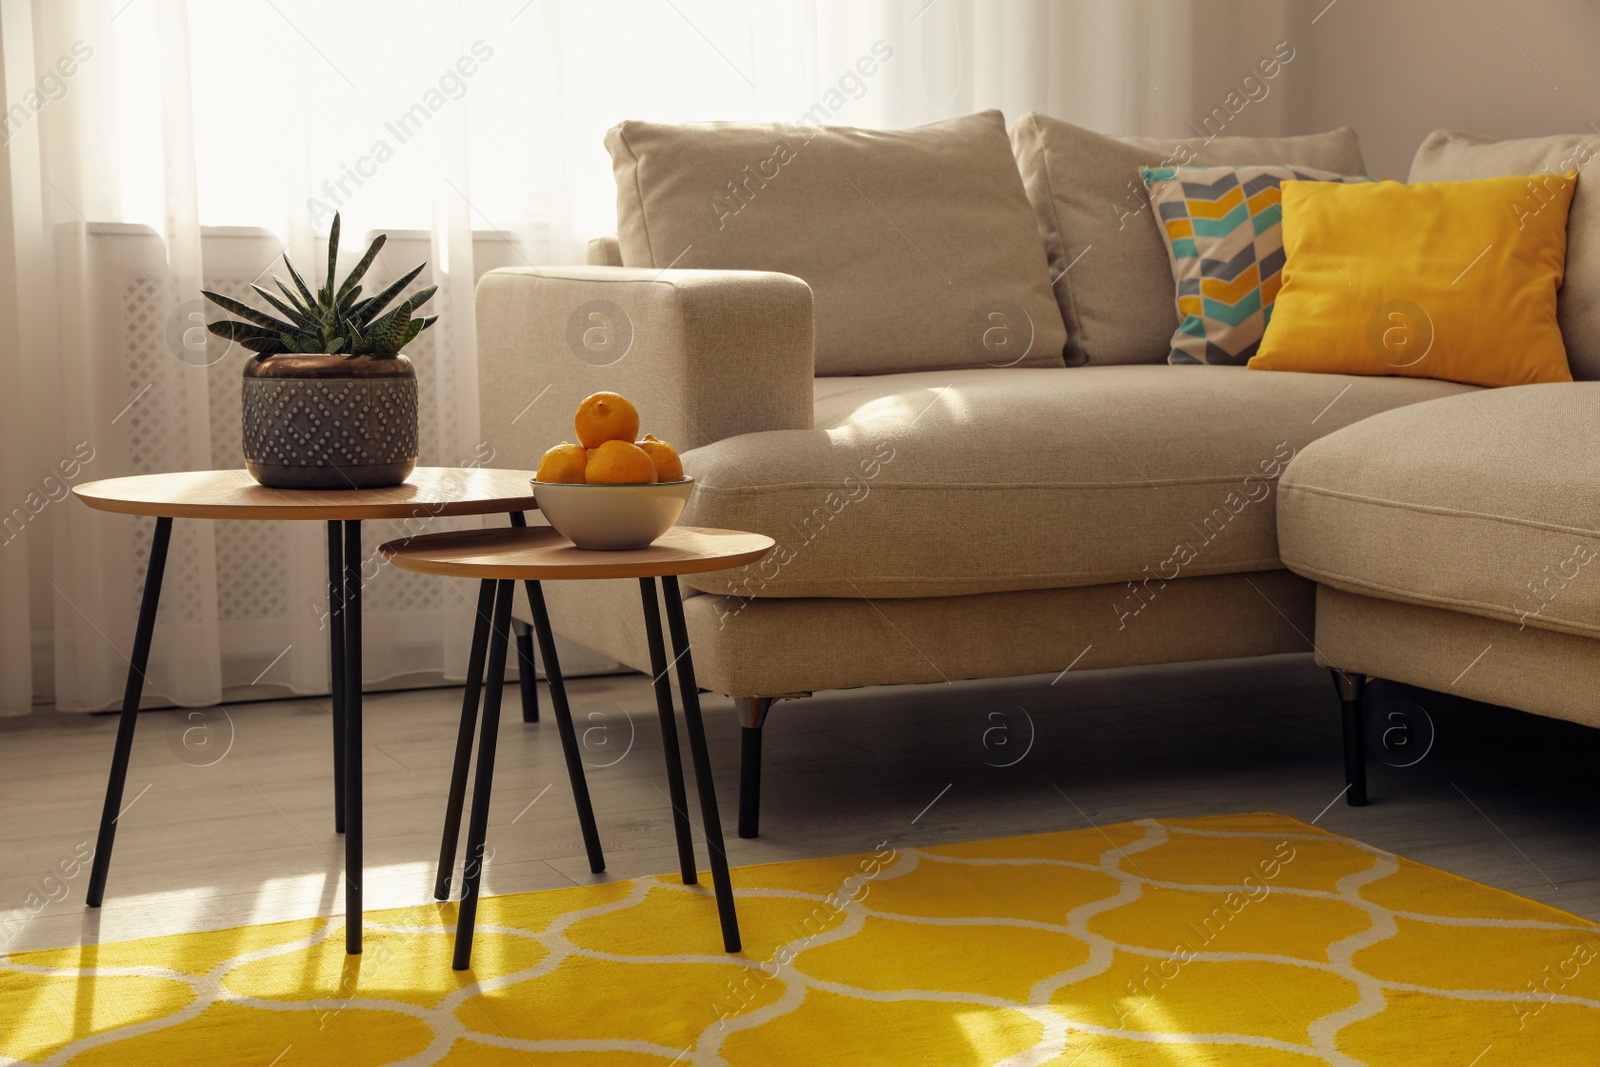 Photo of Living room interior with stylish rug and furniture, above view